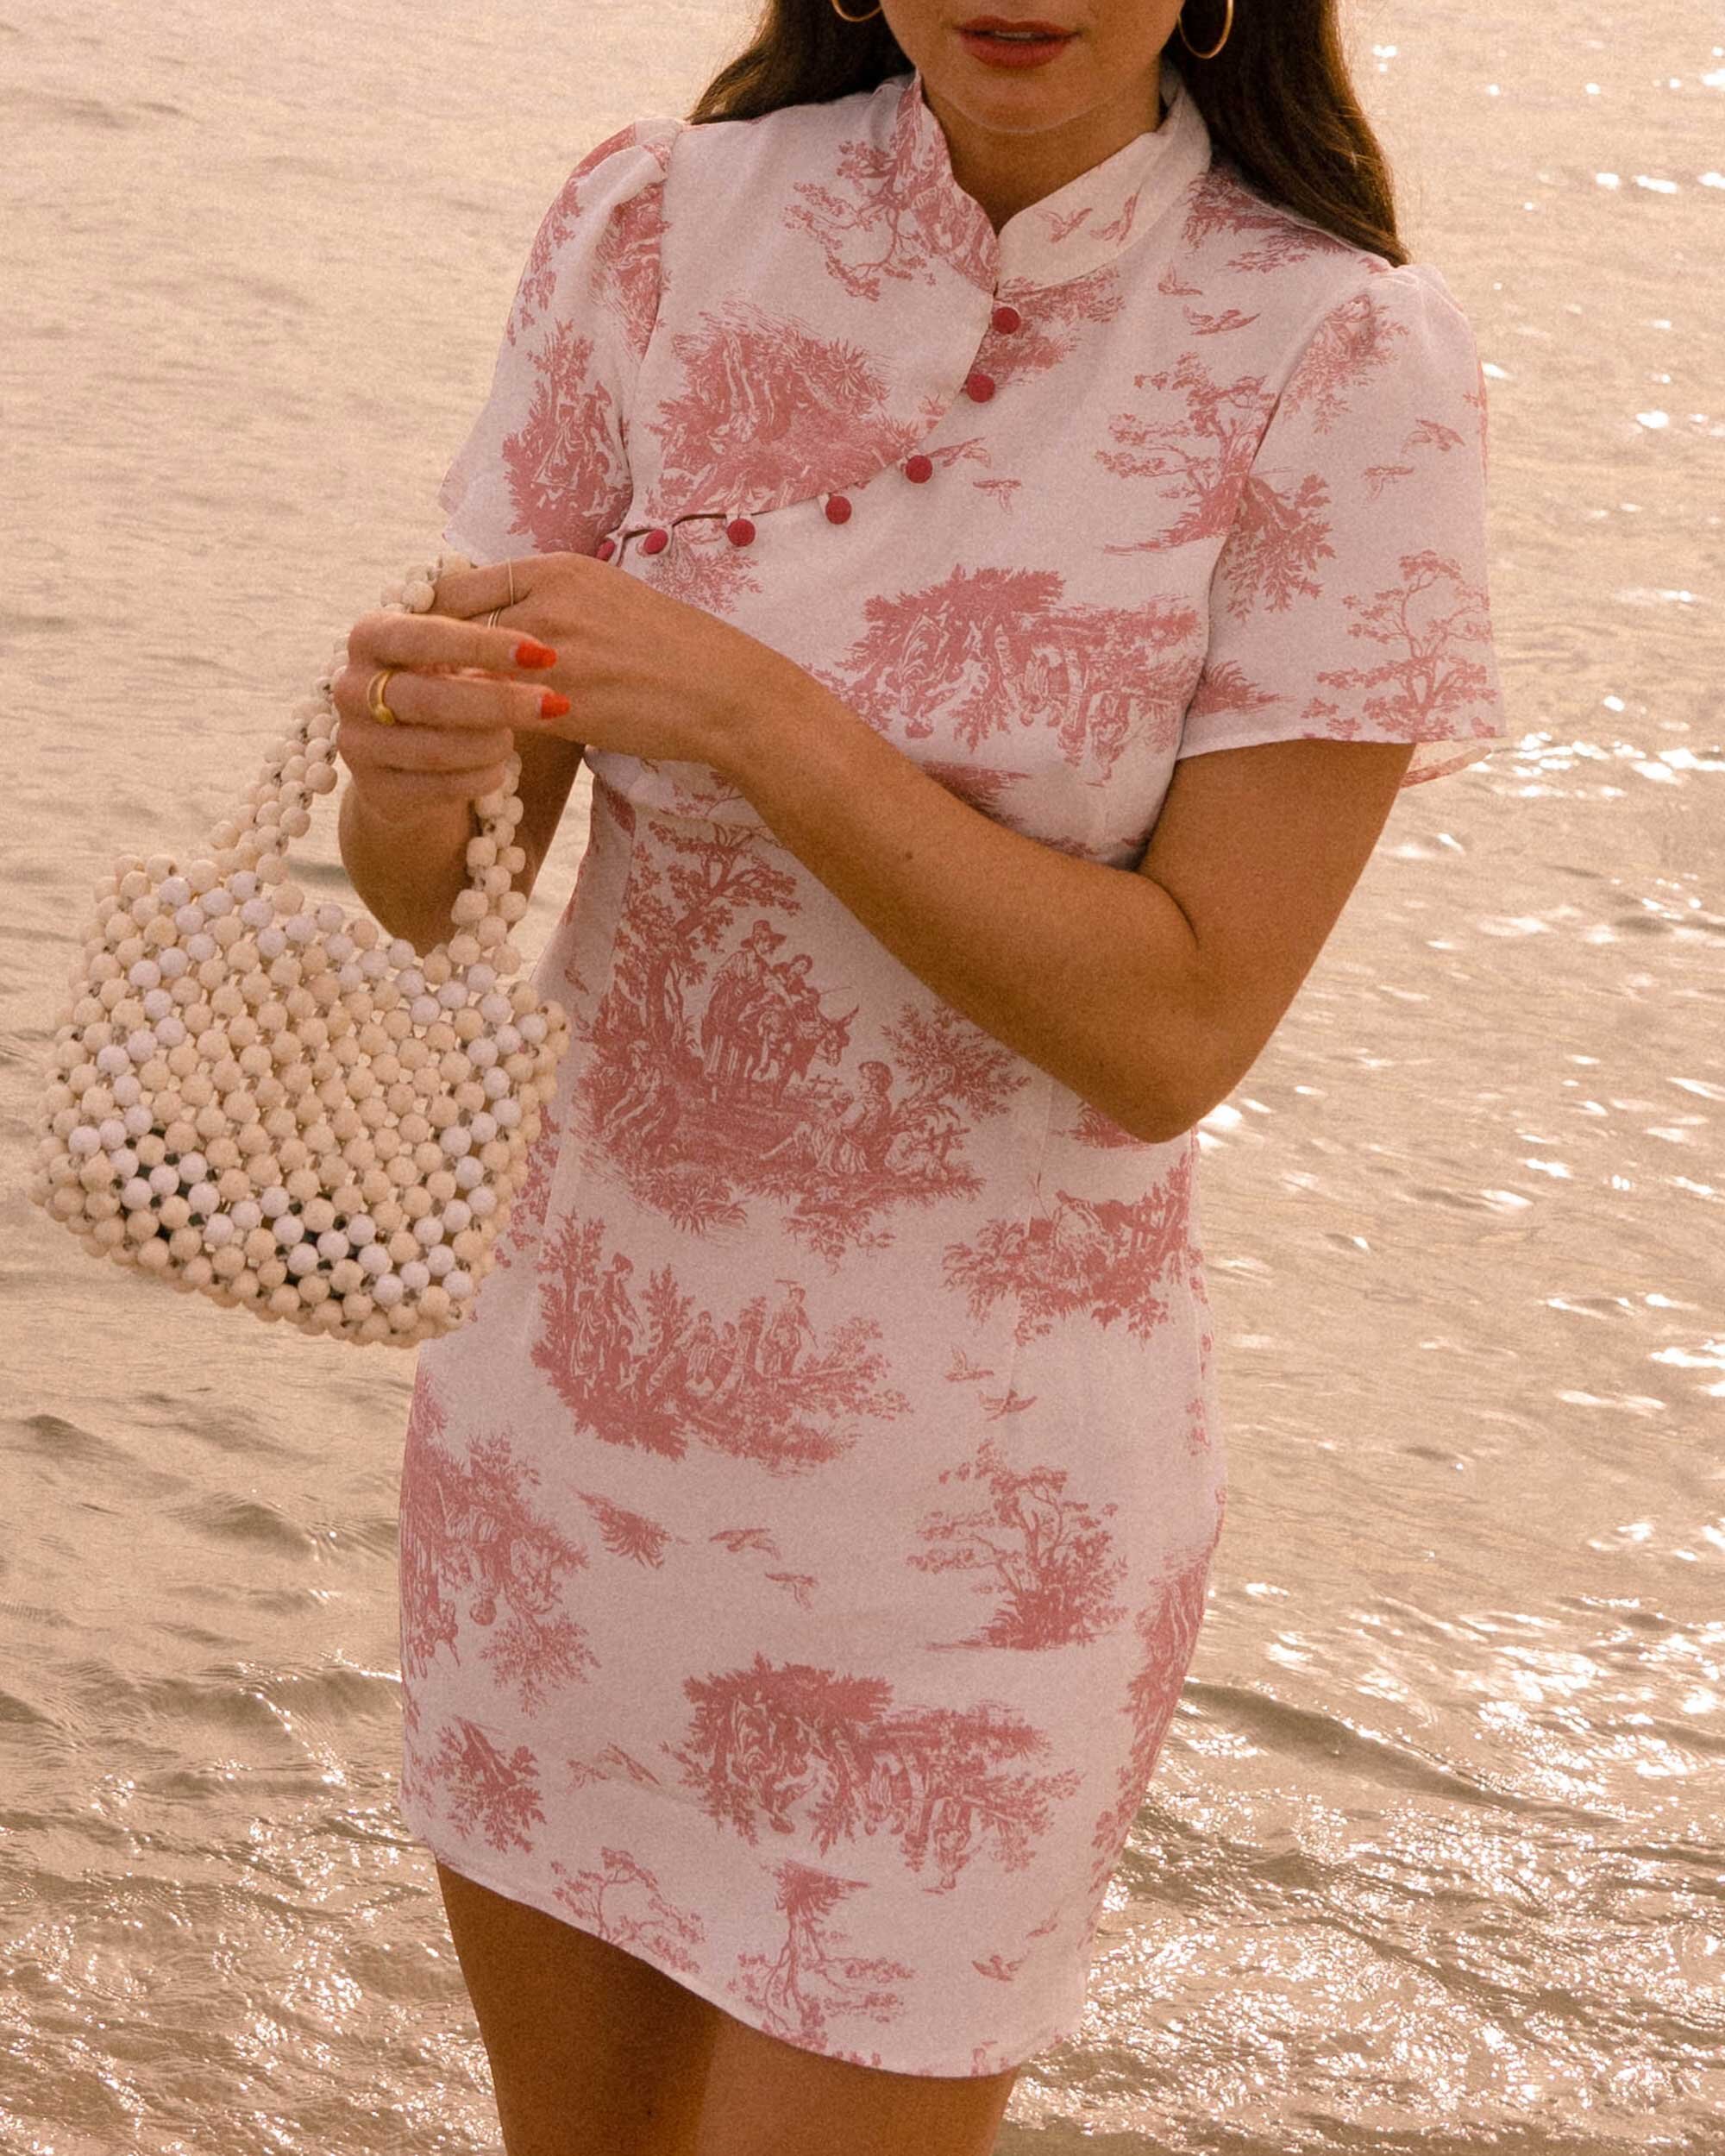 Sarah+Butler+of+Sarah+Styles+Seattle+wears+Stone+Cold+Fox+Lure+Pink+Toile+Print+Mini+Dress+in+Newport+Beach,+California+for+the+perfect+spring+outfit+|+@sarahchristine+-3.jpg